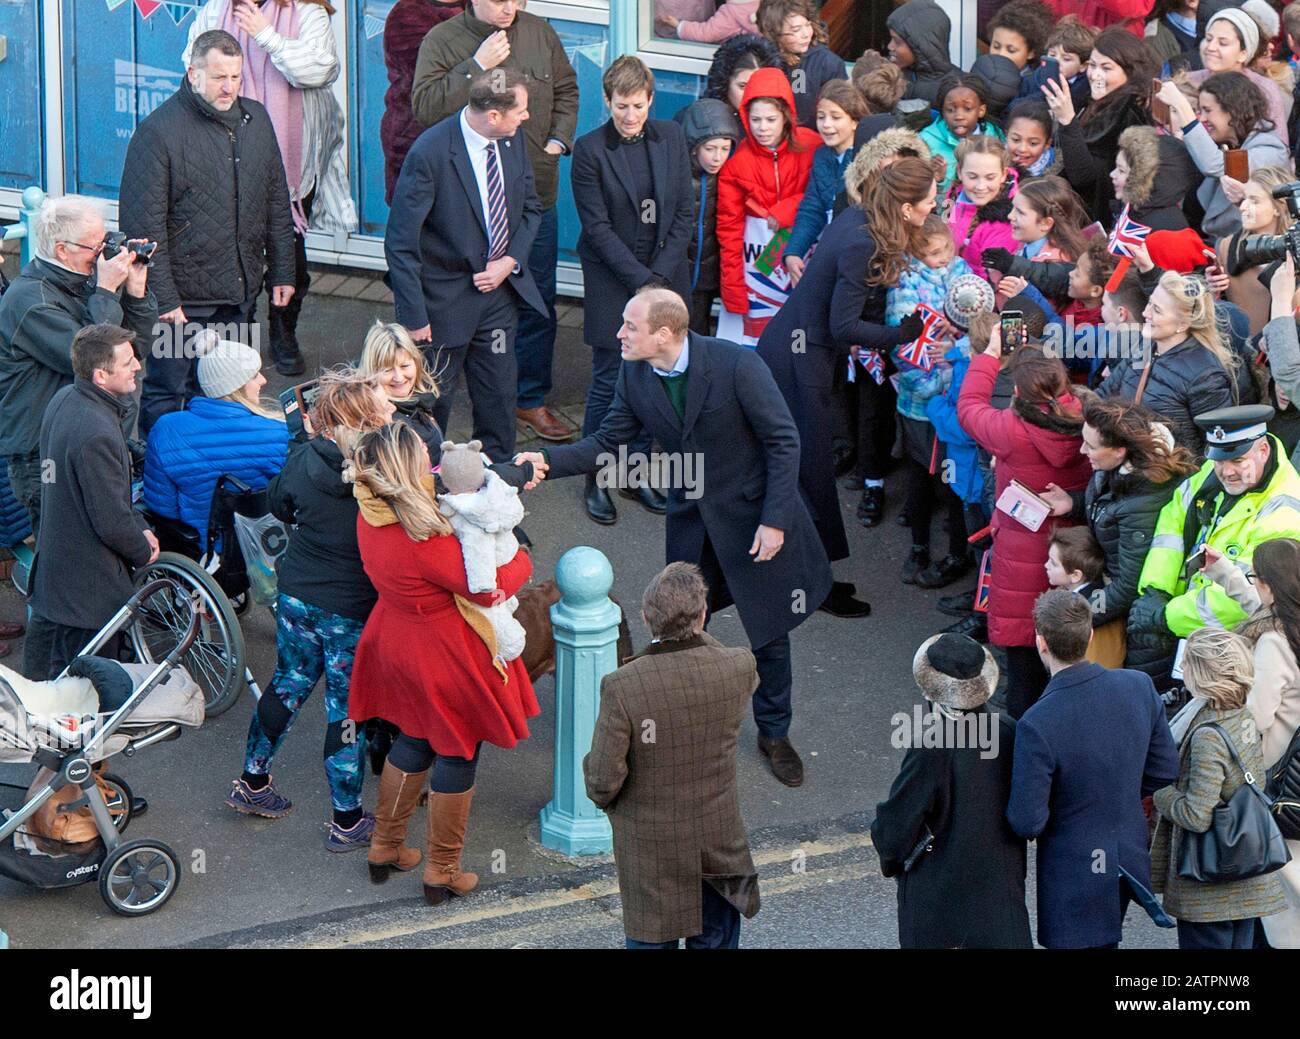 Mumbles Pier - Swansea - Wales - UK - 4th February 2020 Prince William, Duke of Cambridge and Catherine, Duchess of Cambridge meeting local schoolchildren after a visit to the RNLI Lifeboat Station in Mumbles near Swansea today.  Pic by Lisa Dawson Rees Credit: Phil Rees/Alamy Live News Stock Photo